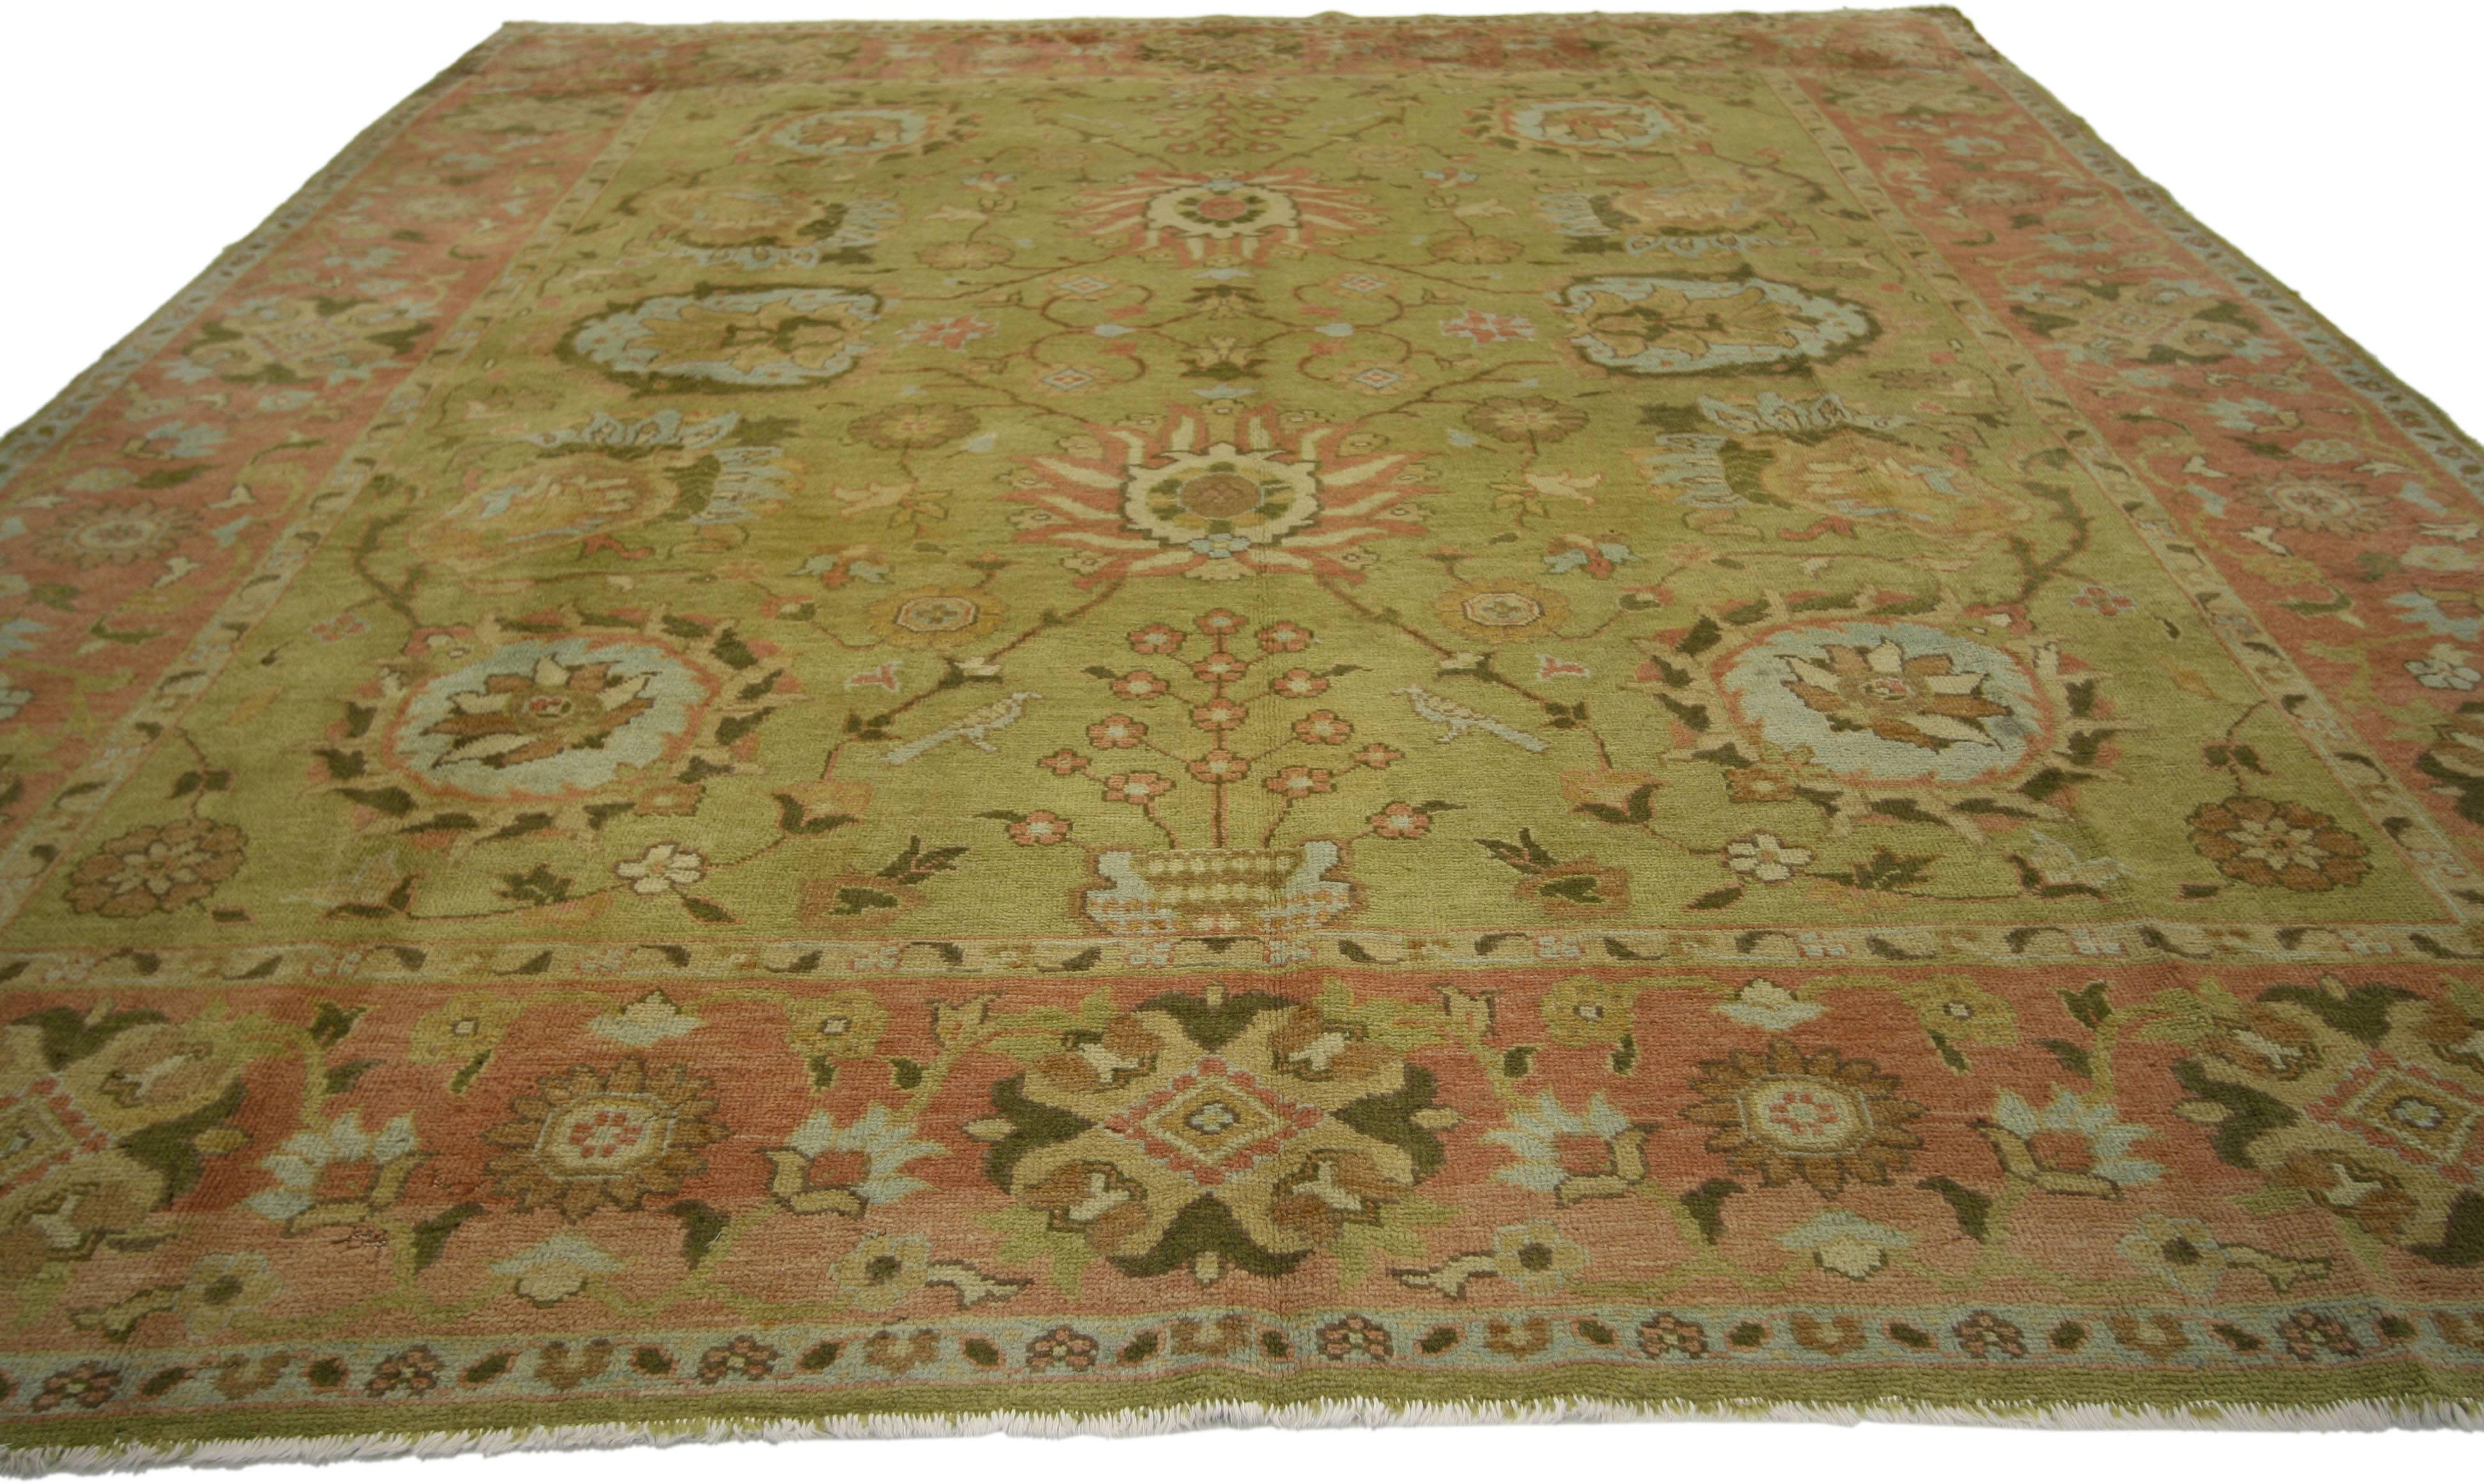 Hand-Knotted Vintage Turkish Oushak Area Rug, Green and Salmon Hues